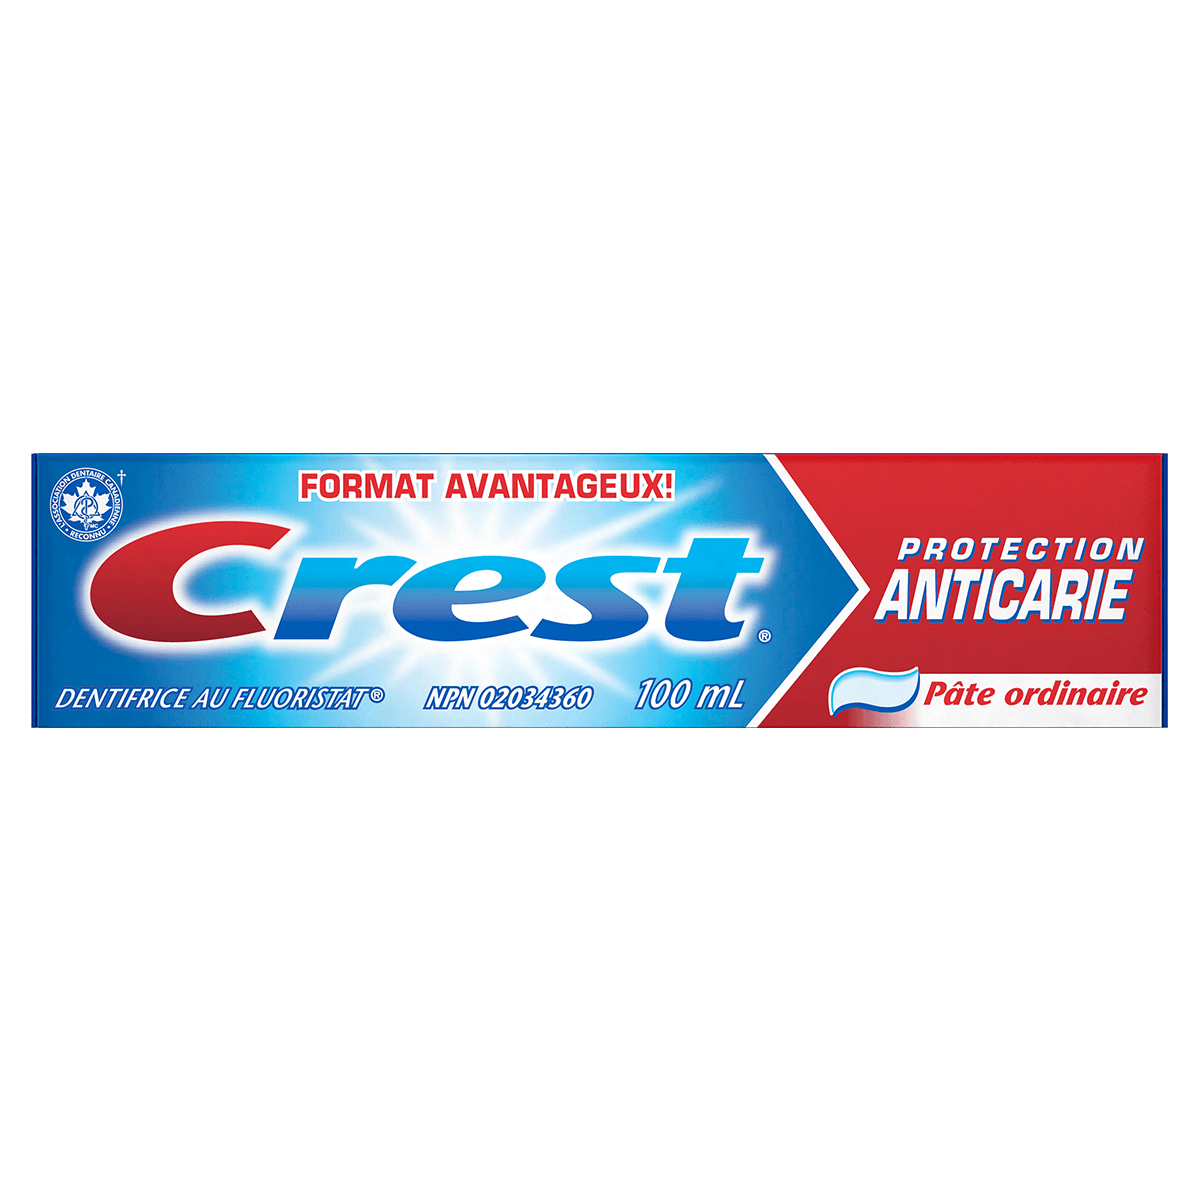 59.2-Crest-Cavity-Protection-Toothpaste-1200x1200 (1)